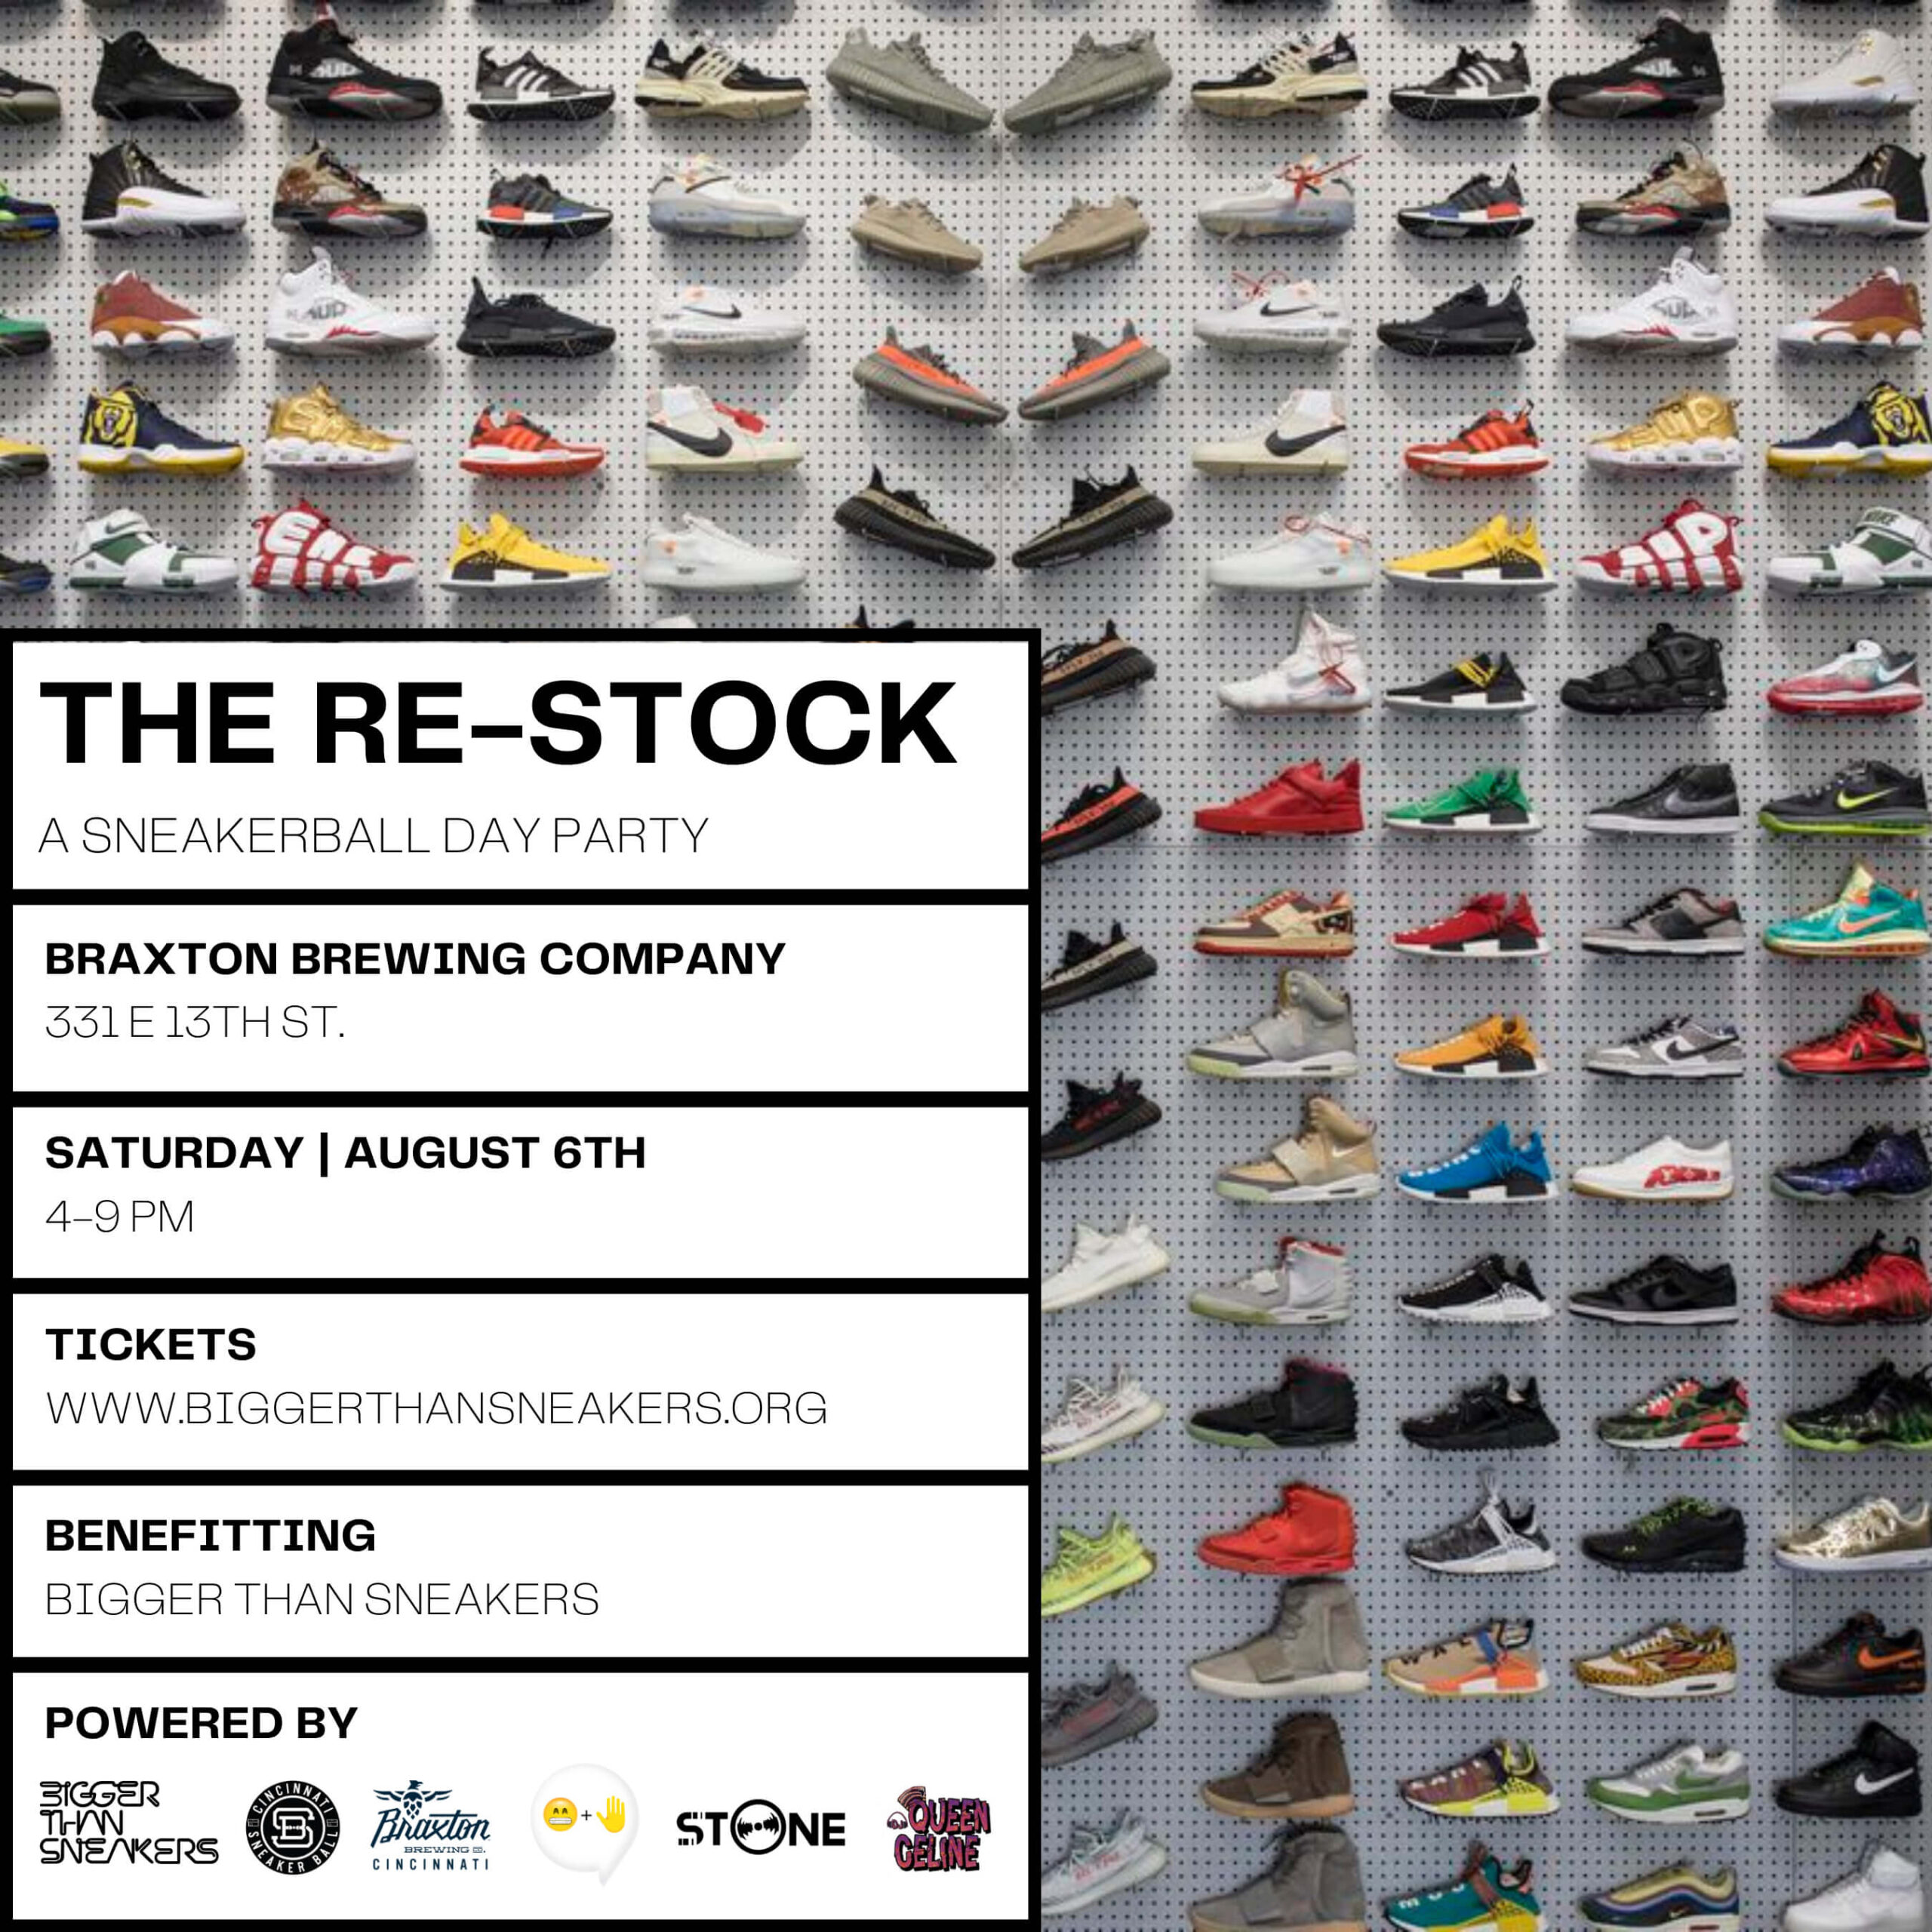 THE RE-STOCK: A SNEAKERBALL DAY PARTY | BRAXTON BREWING COMPANY, 331 E 13TH ST. | SATURDAY, AUGUST 6TH, 4-9 PM | TICKETS: www.biggerthansneakers.org | POWERED BY BIGGER THAN SNEAKERS, CINCINNATI SNEAKERBALL, BRAXTON BREWING CO. CINCINNATI, 😁 + ✋, STONE, and QUEEN CELINE